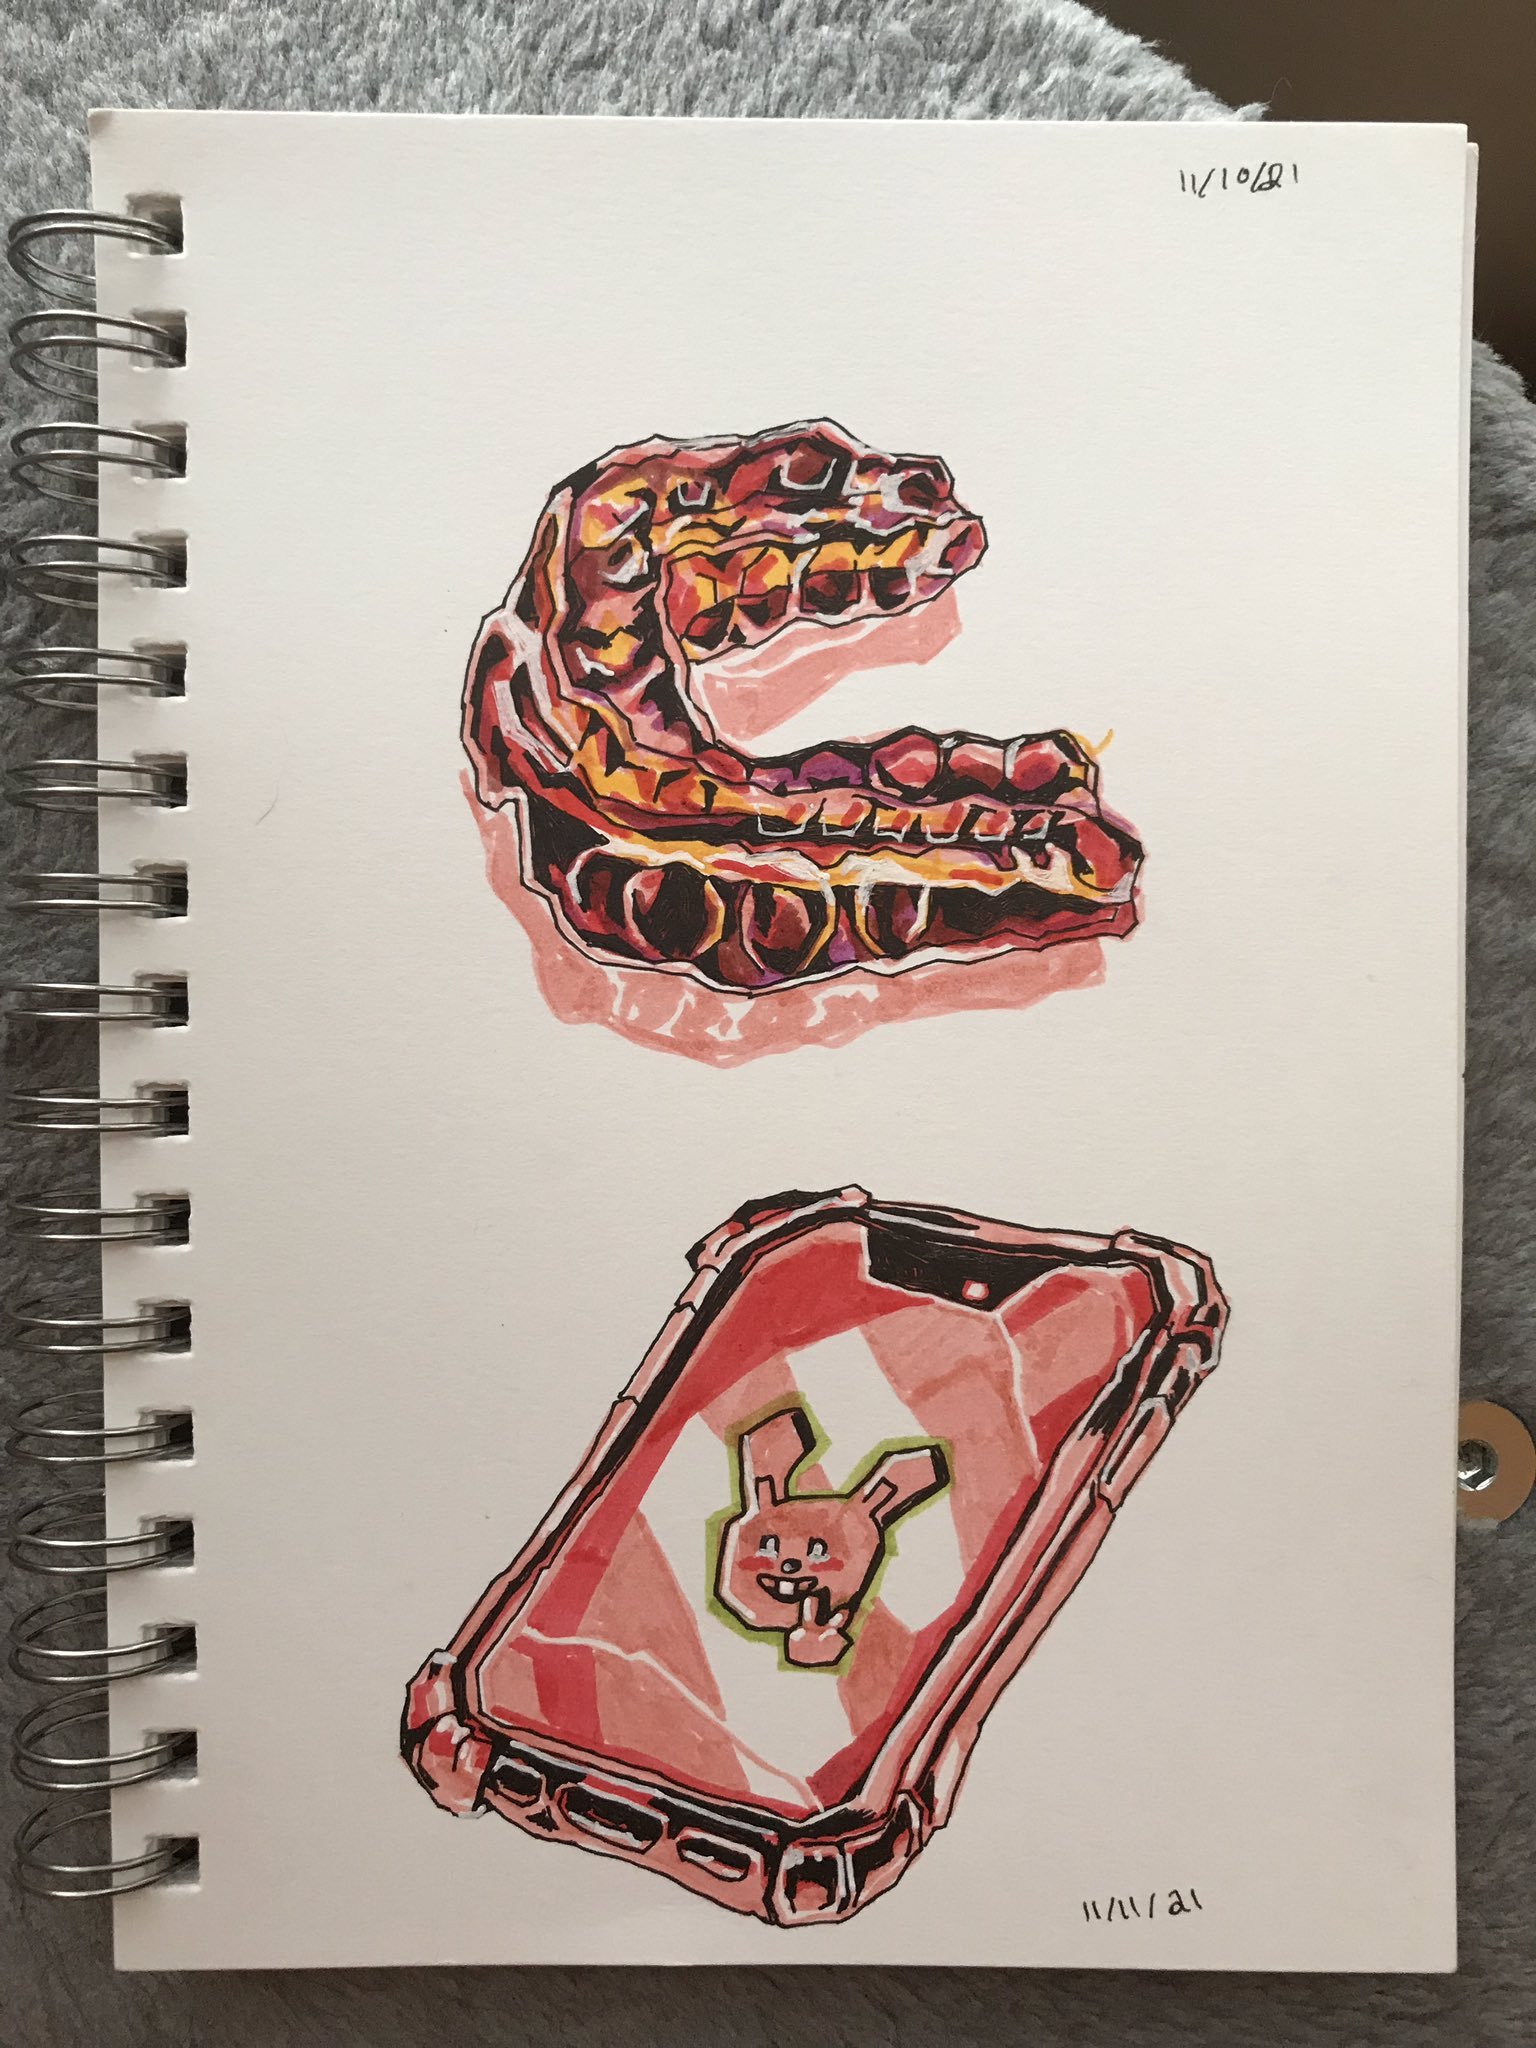 Photo of a sketchbook page showing a drawing of a plastic mouth guard, and of a phone